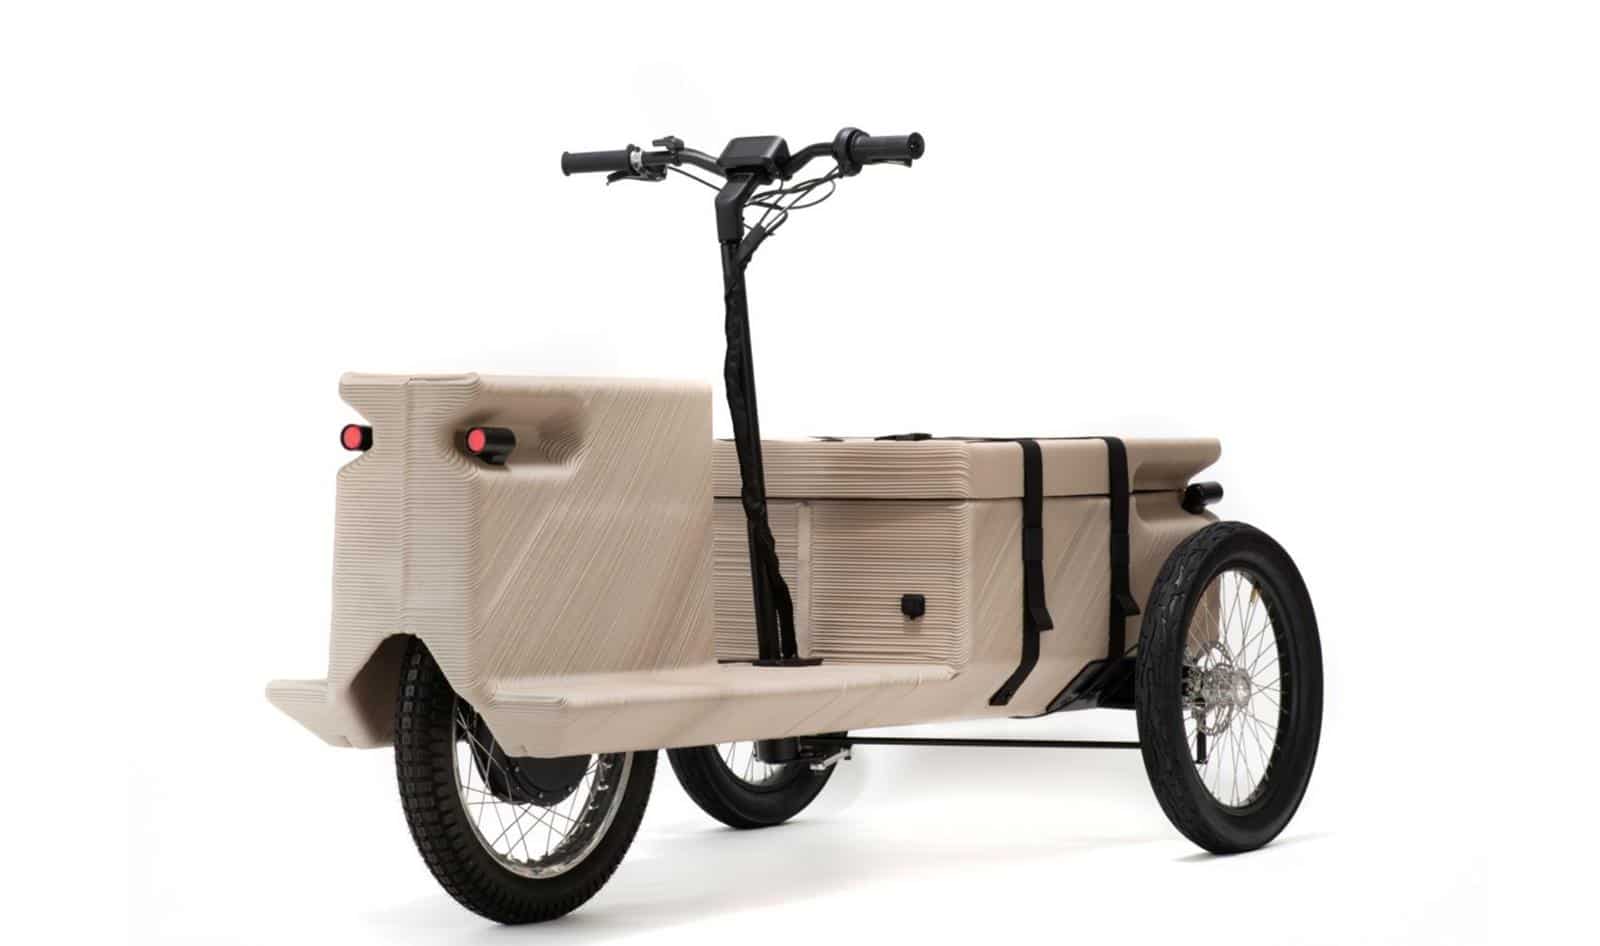 3D printed electric tricycle made of plastic scraps